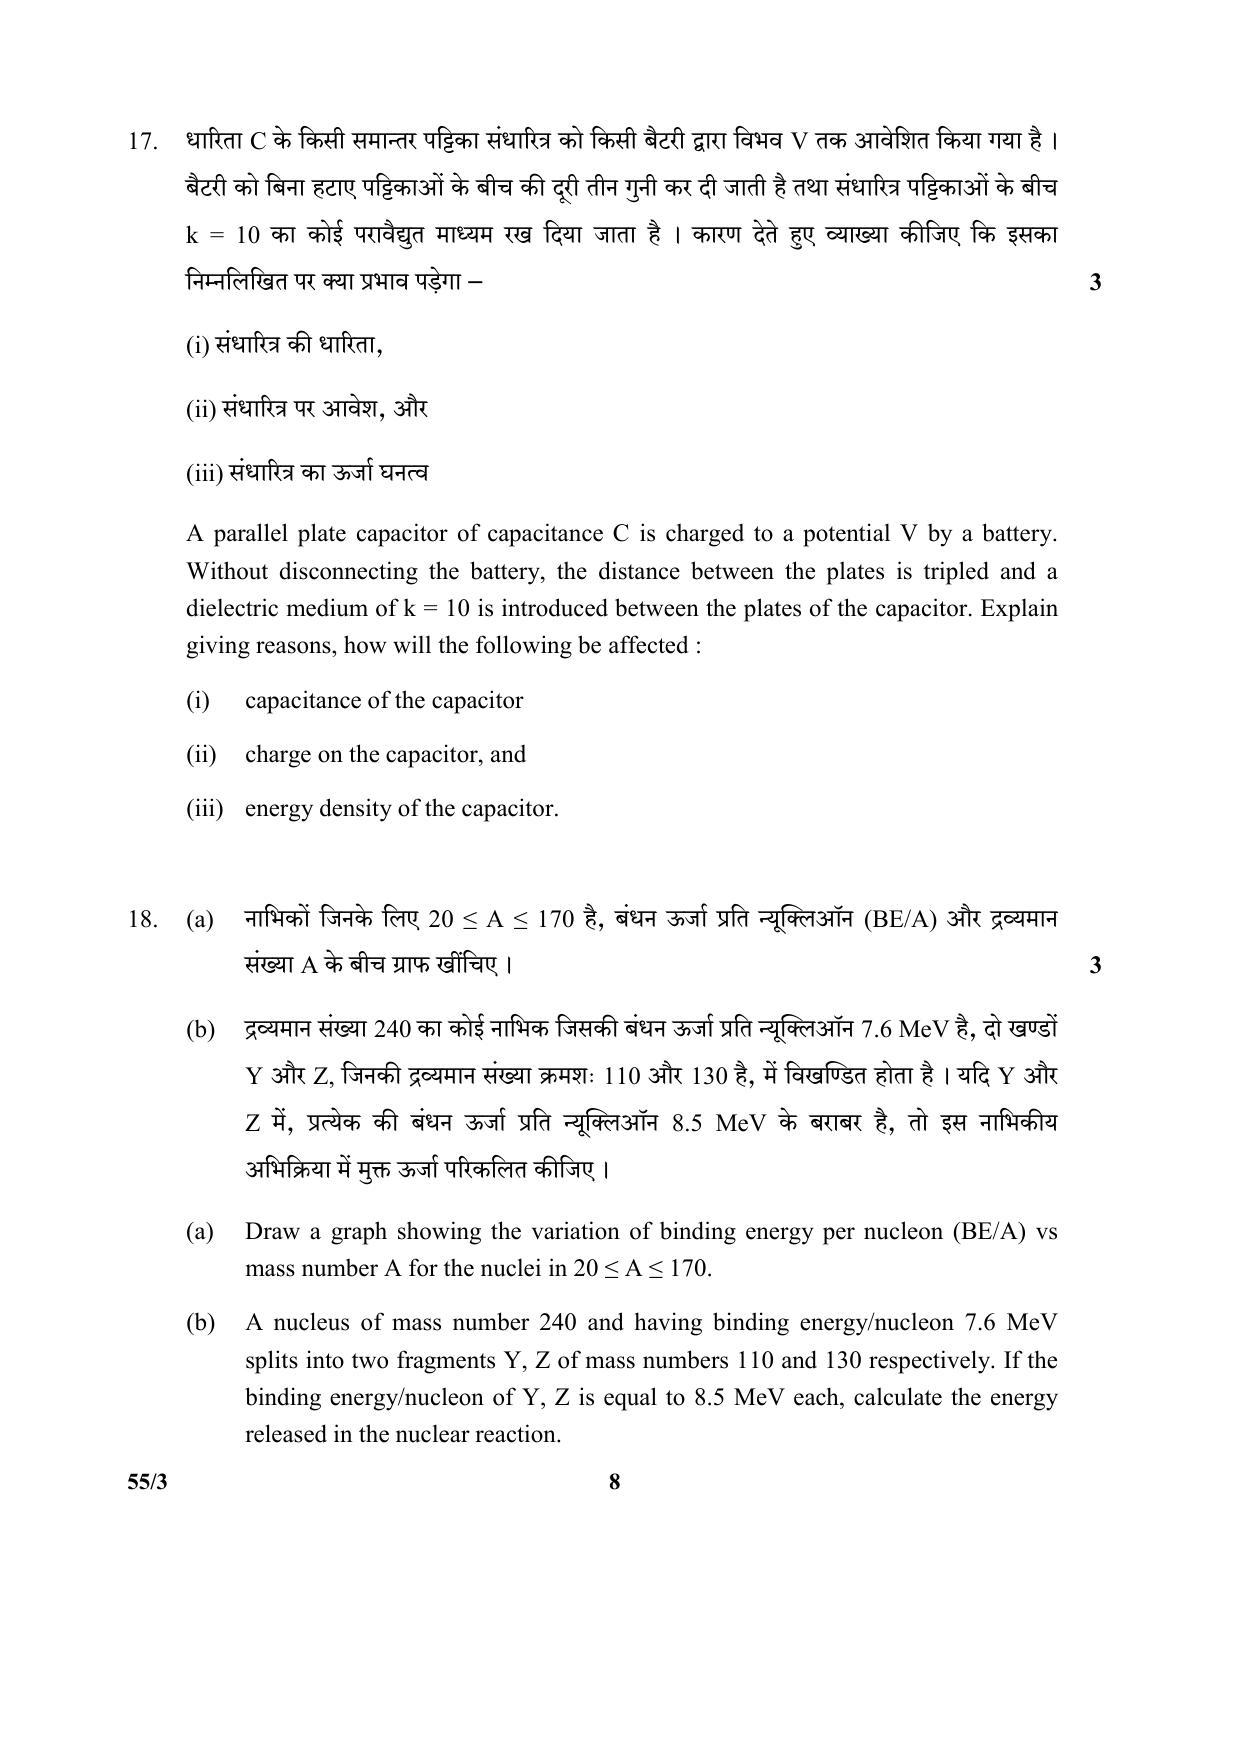 CBSE Class 12 55-3 (Physics) 2017-comptt Question Paper - Page 8